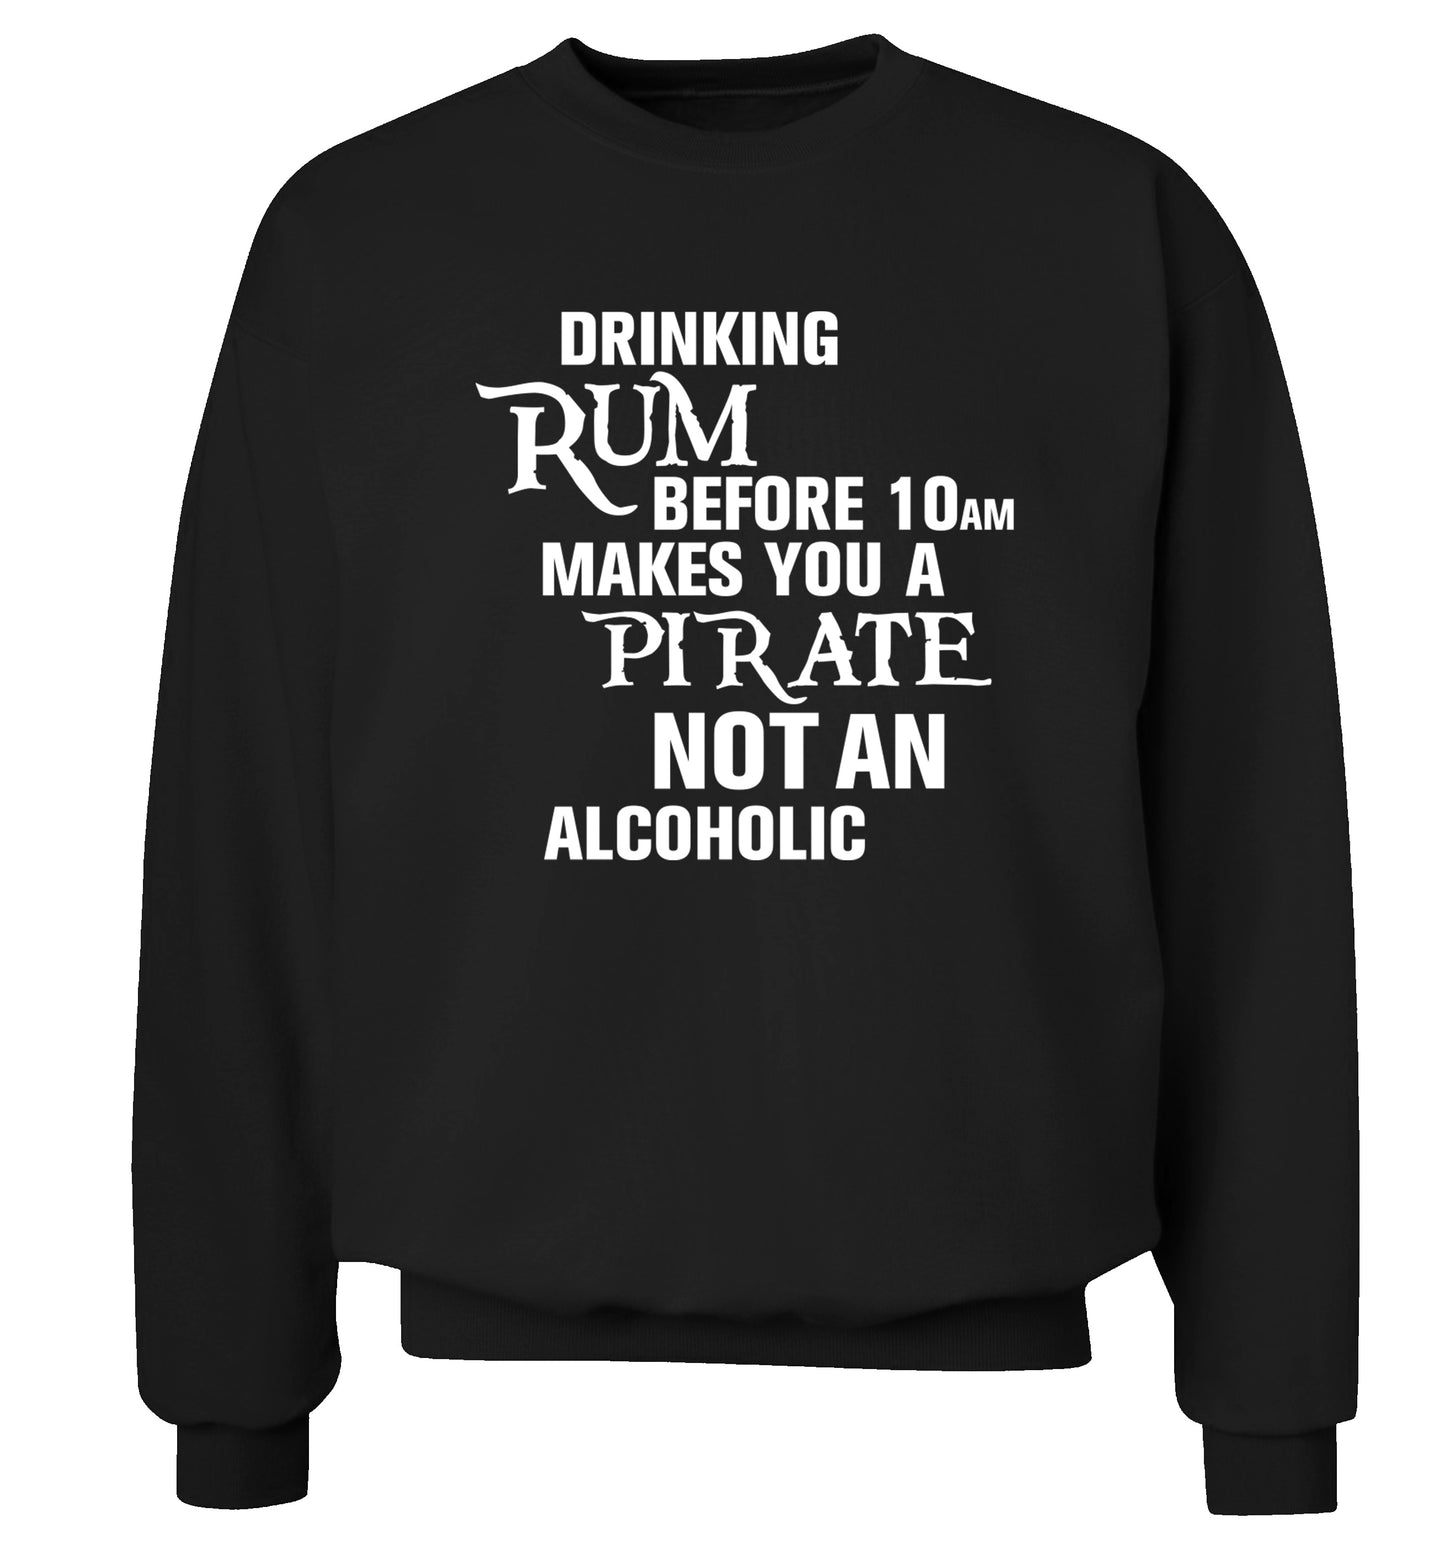 Drinking rum before 10AM makes you a pirate not an alcoholic Adult's unisex black Sweater 2XL